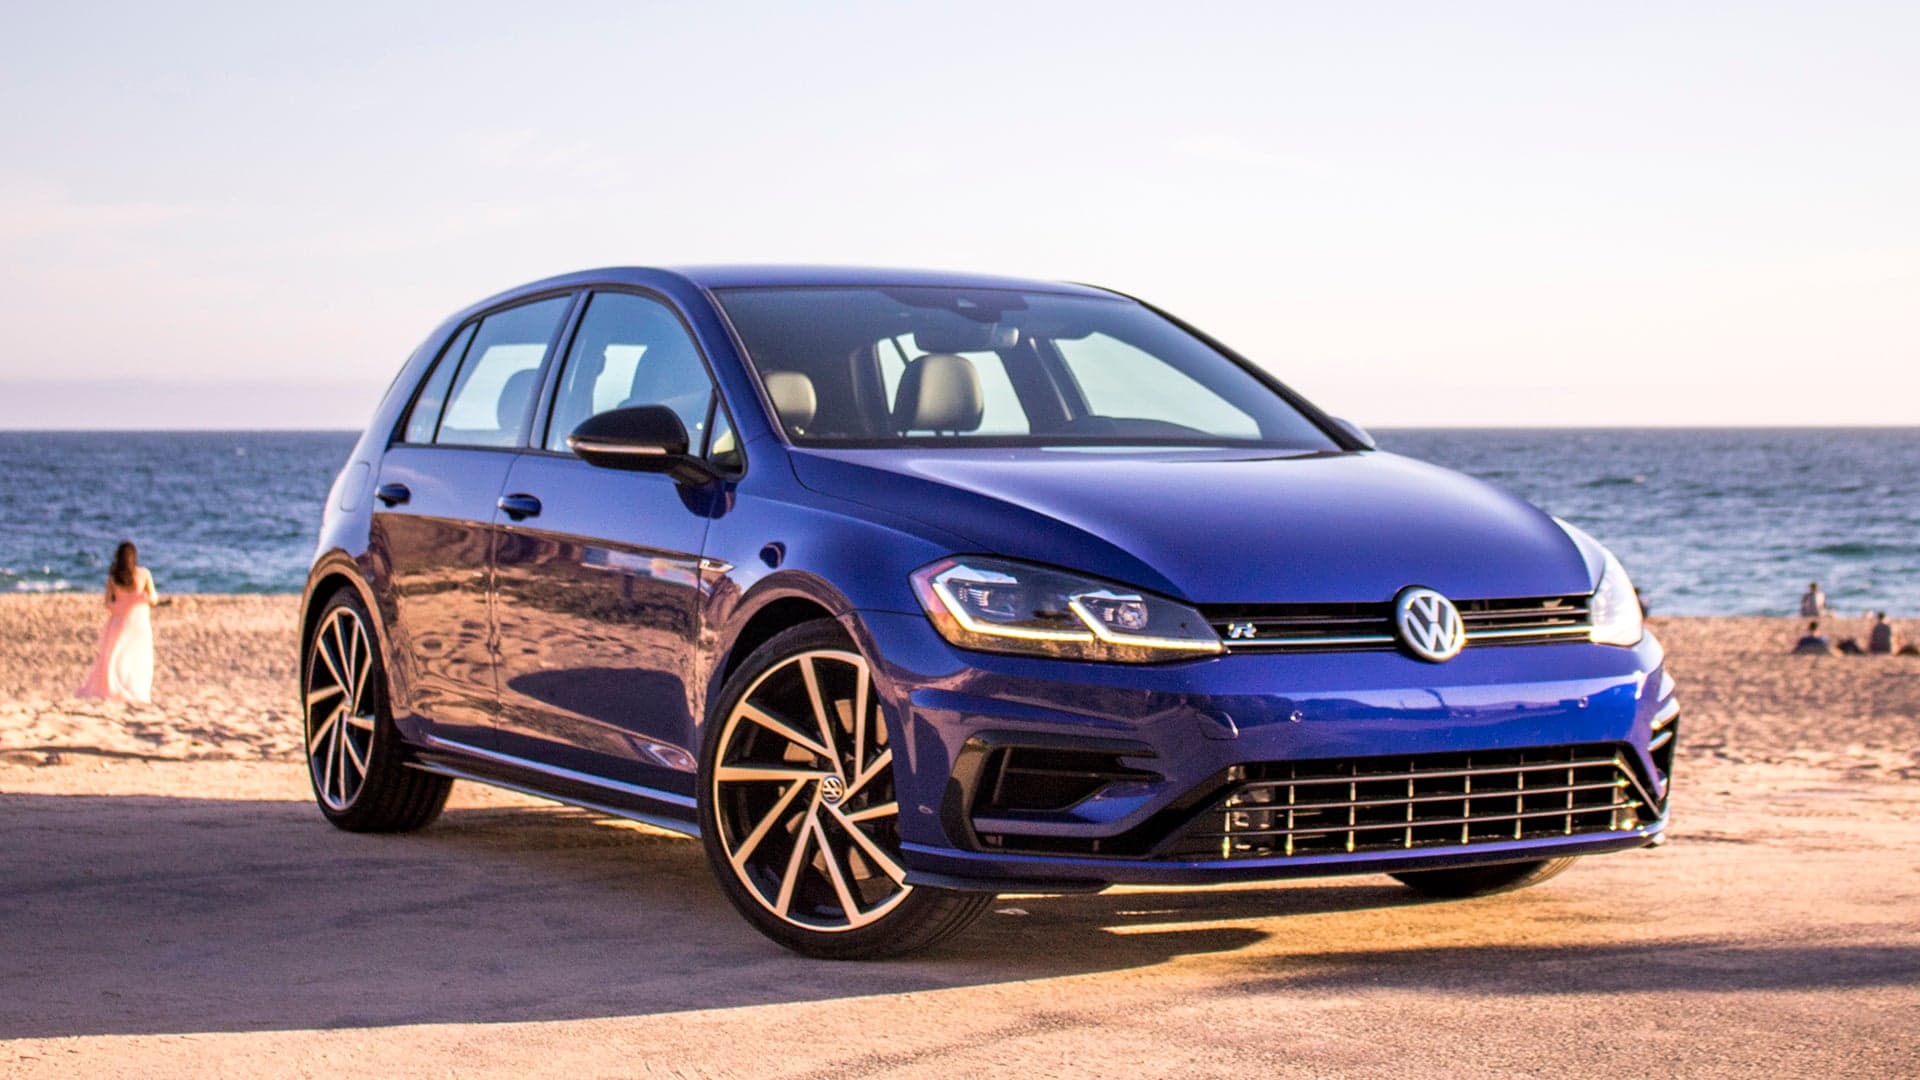 2018 Volkswagen Golf R Review: Sense and Sensibility in the Hot Hatch for Adults